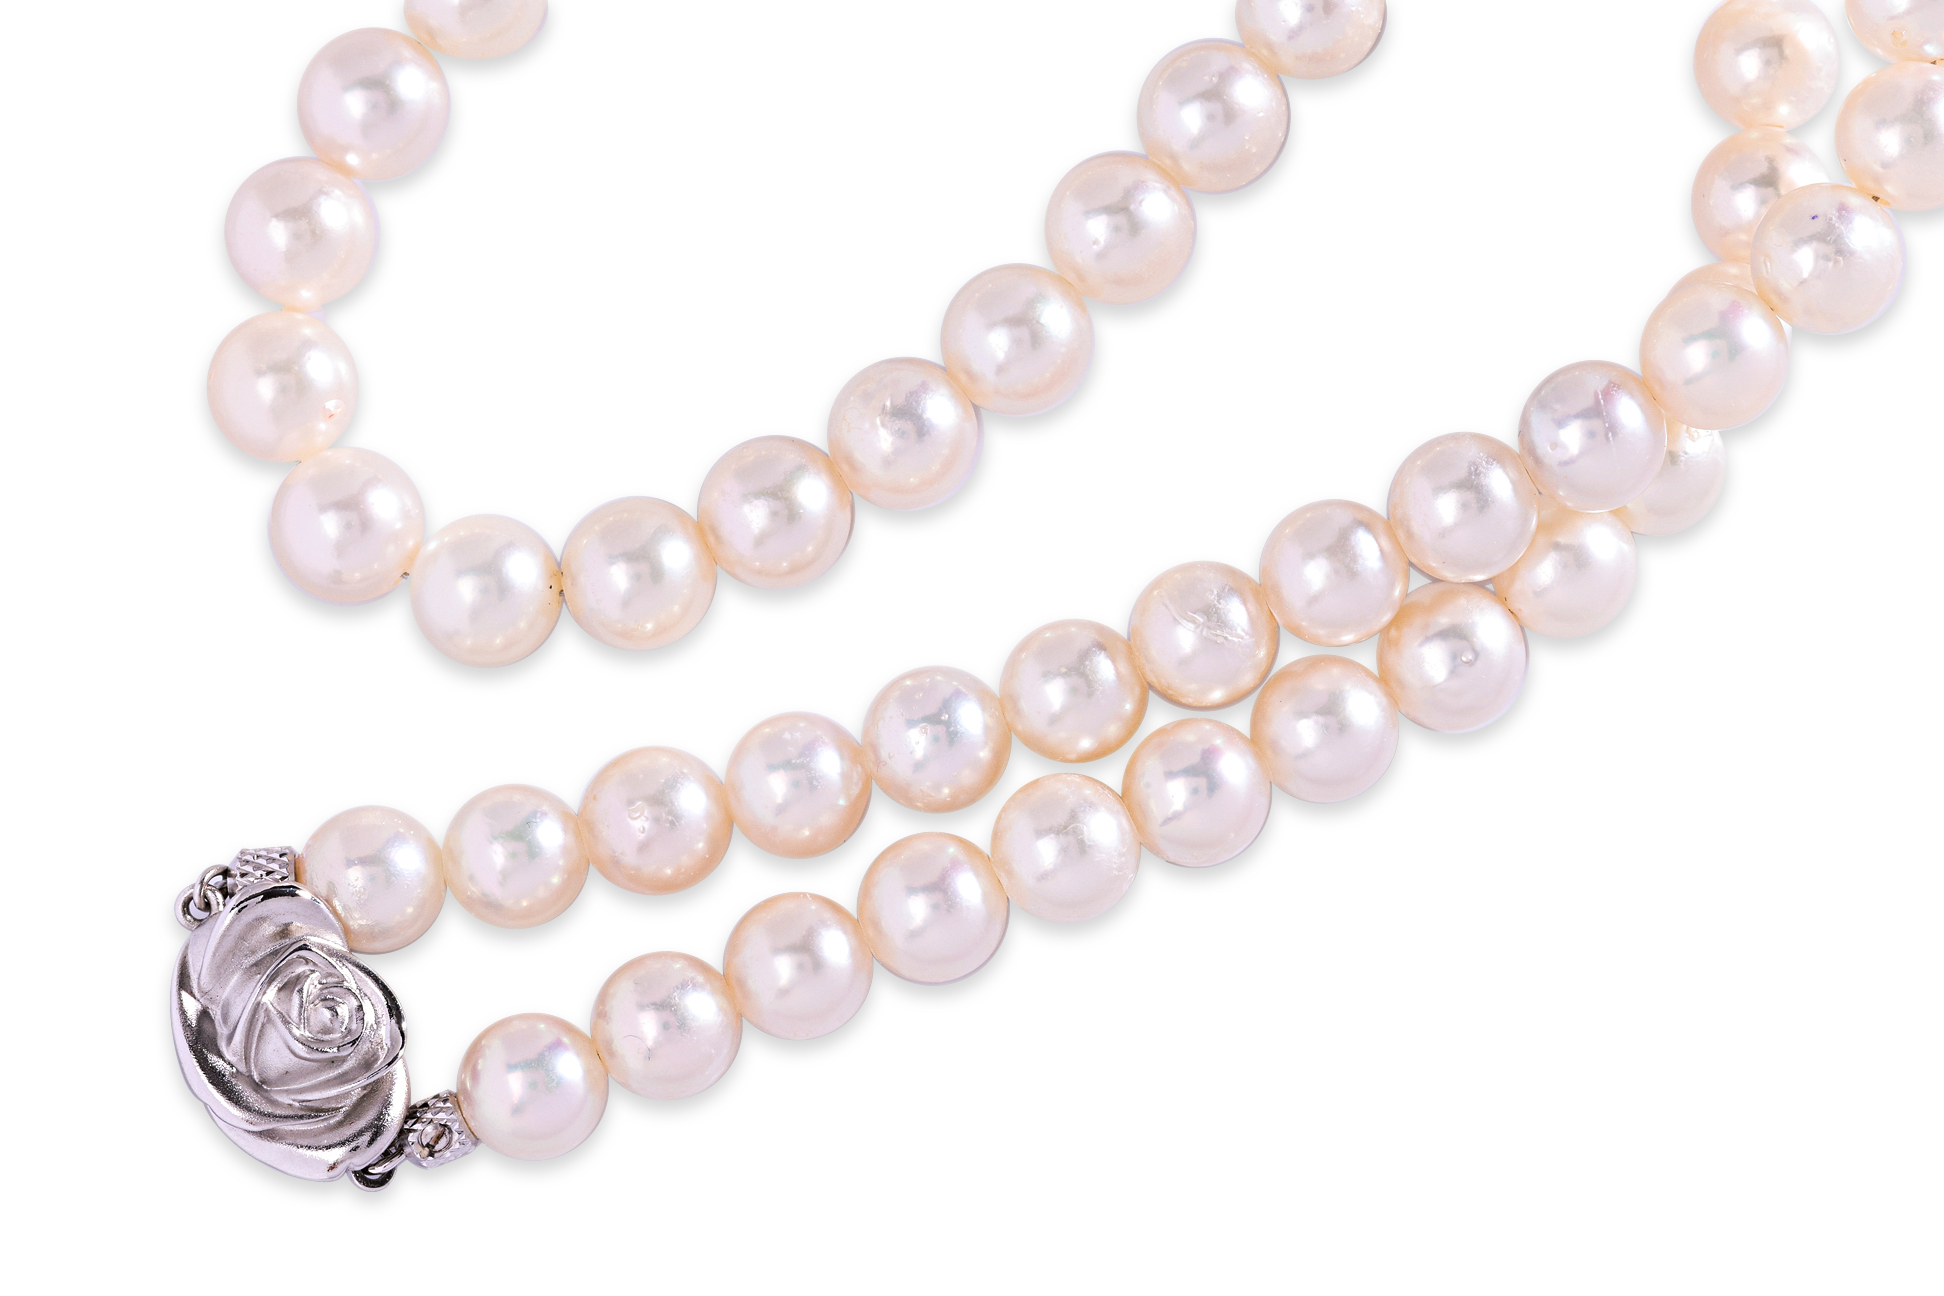 AN AKOYA CULTURED PEARL STRAND - Image 2 of 3